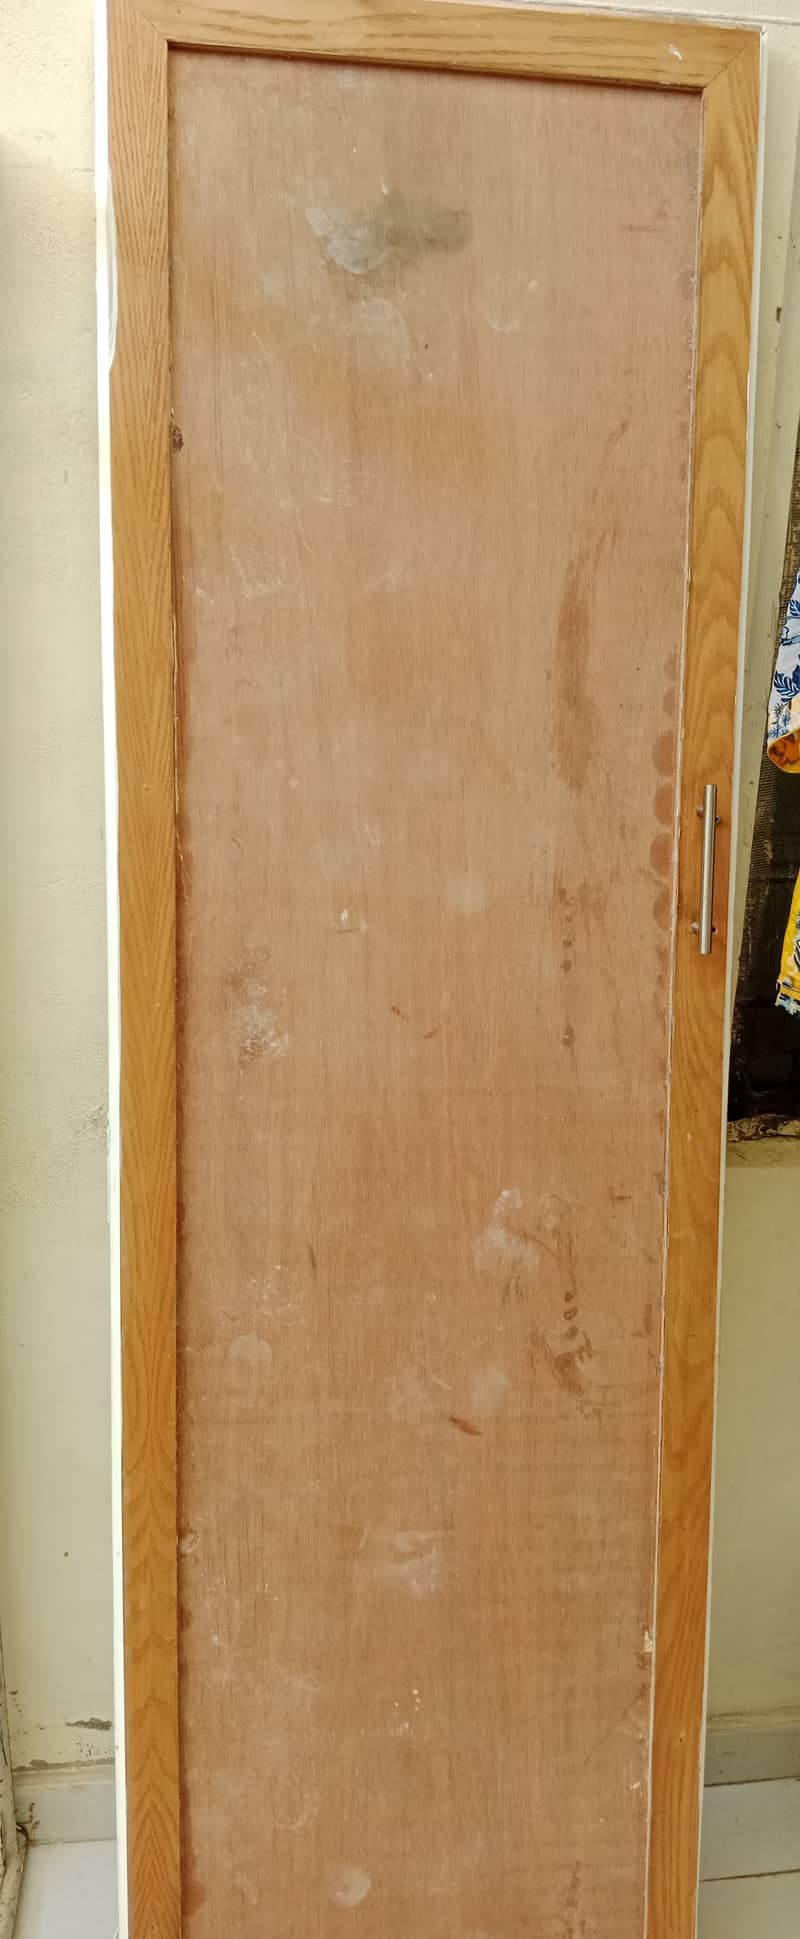 Door for sale neat and clean only WhatsUp 03060103003 10